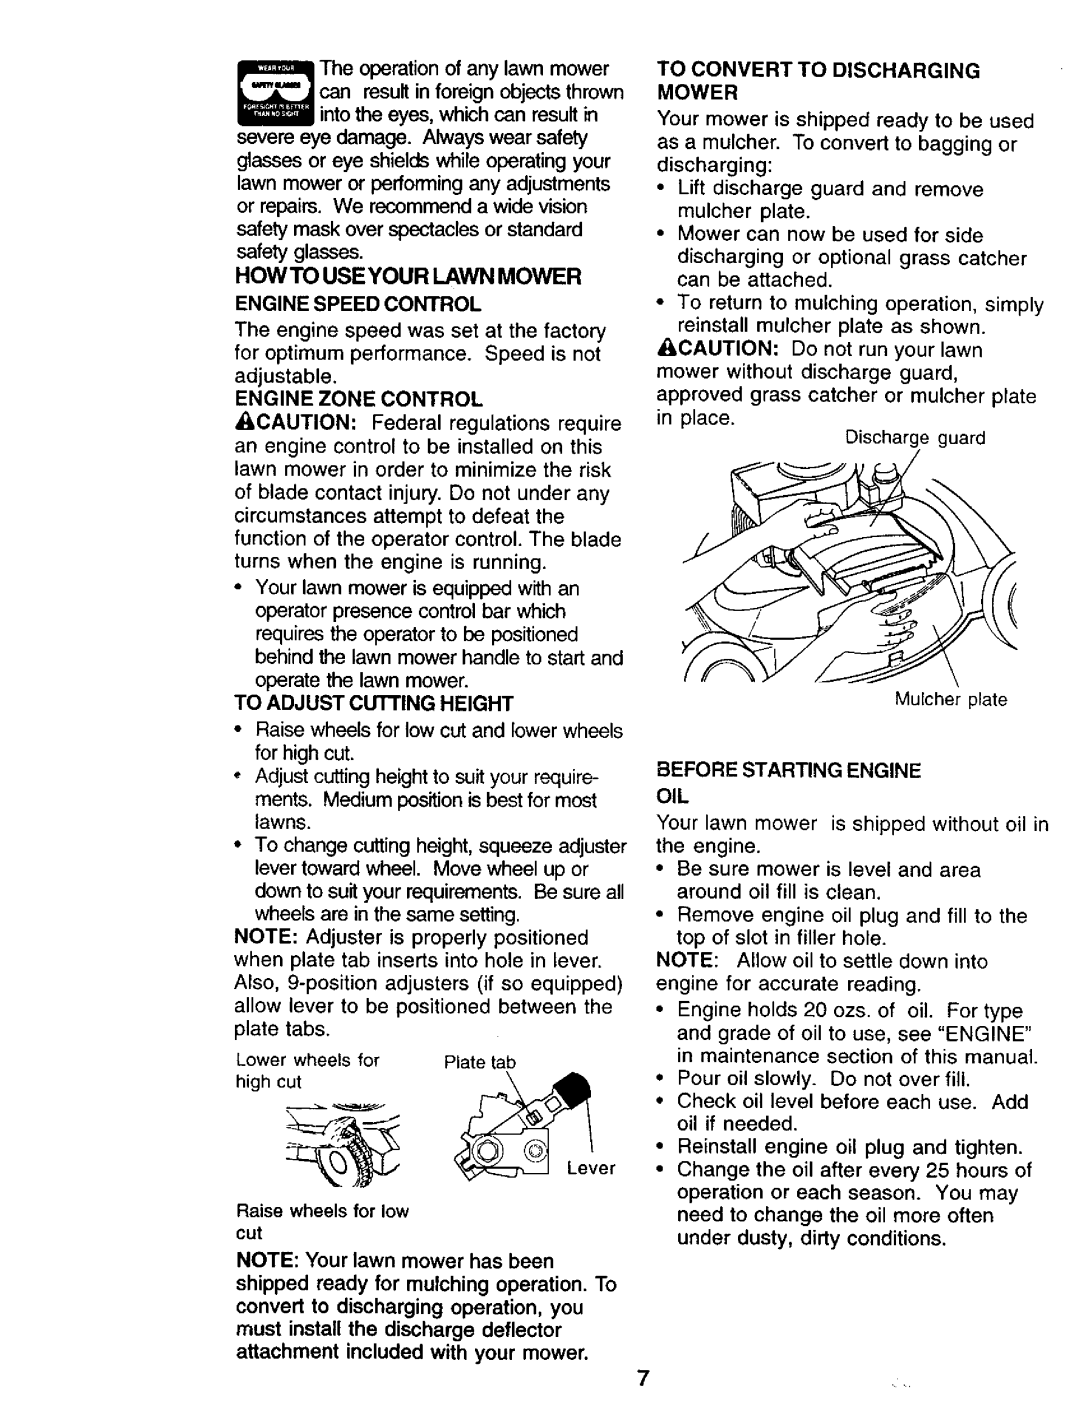 Craftsman 917.38741 owner manual Howto Useyour Lawn Mower Engine Speed Control, NOTE Your lawn mower has been 